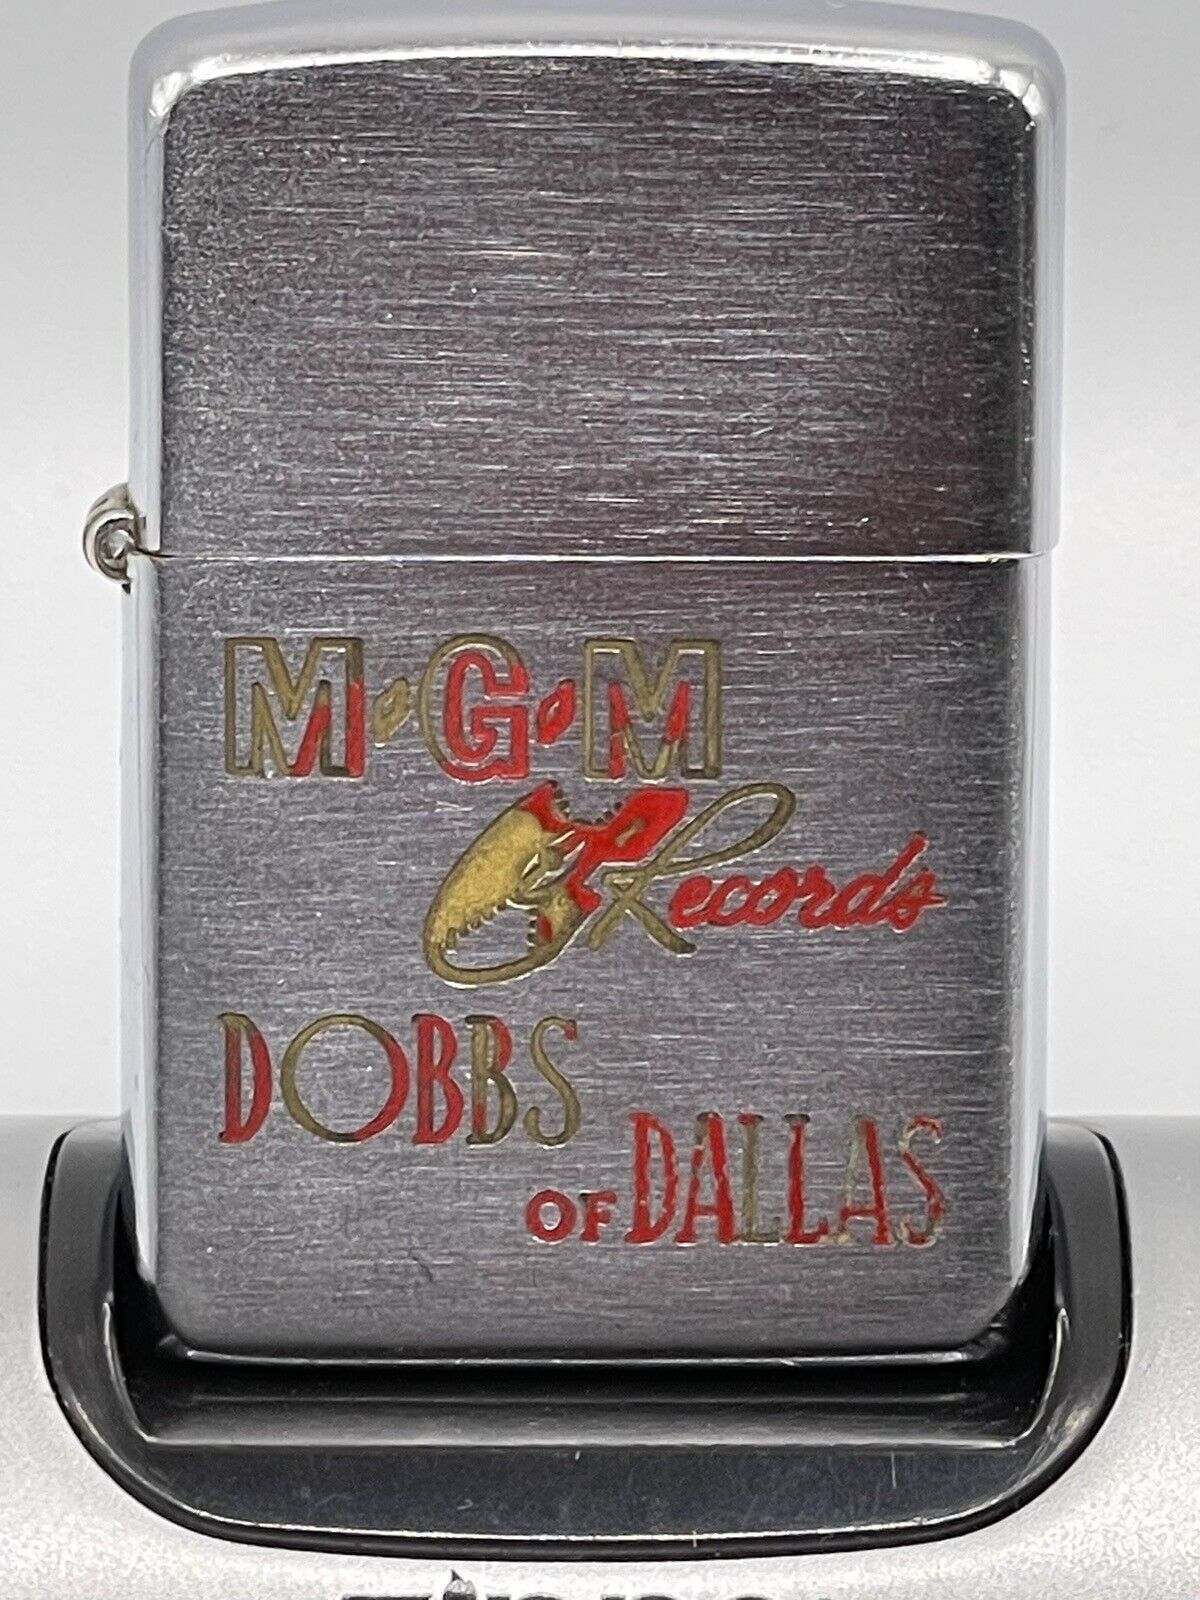 1949-1953 MGM Records And Dobbs Of Dallas Zippo Lighter